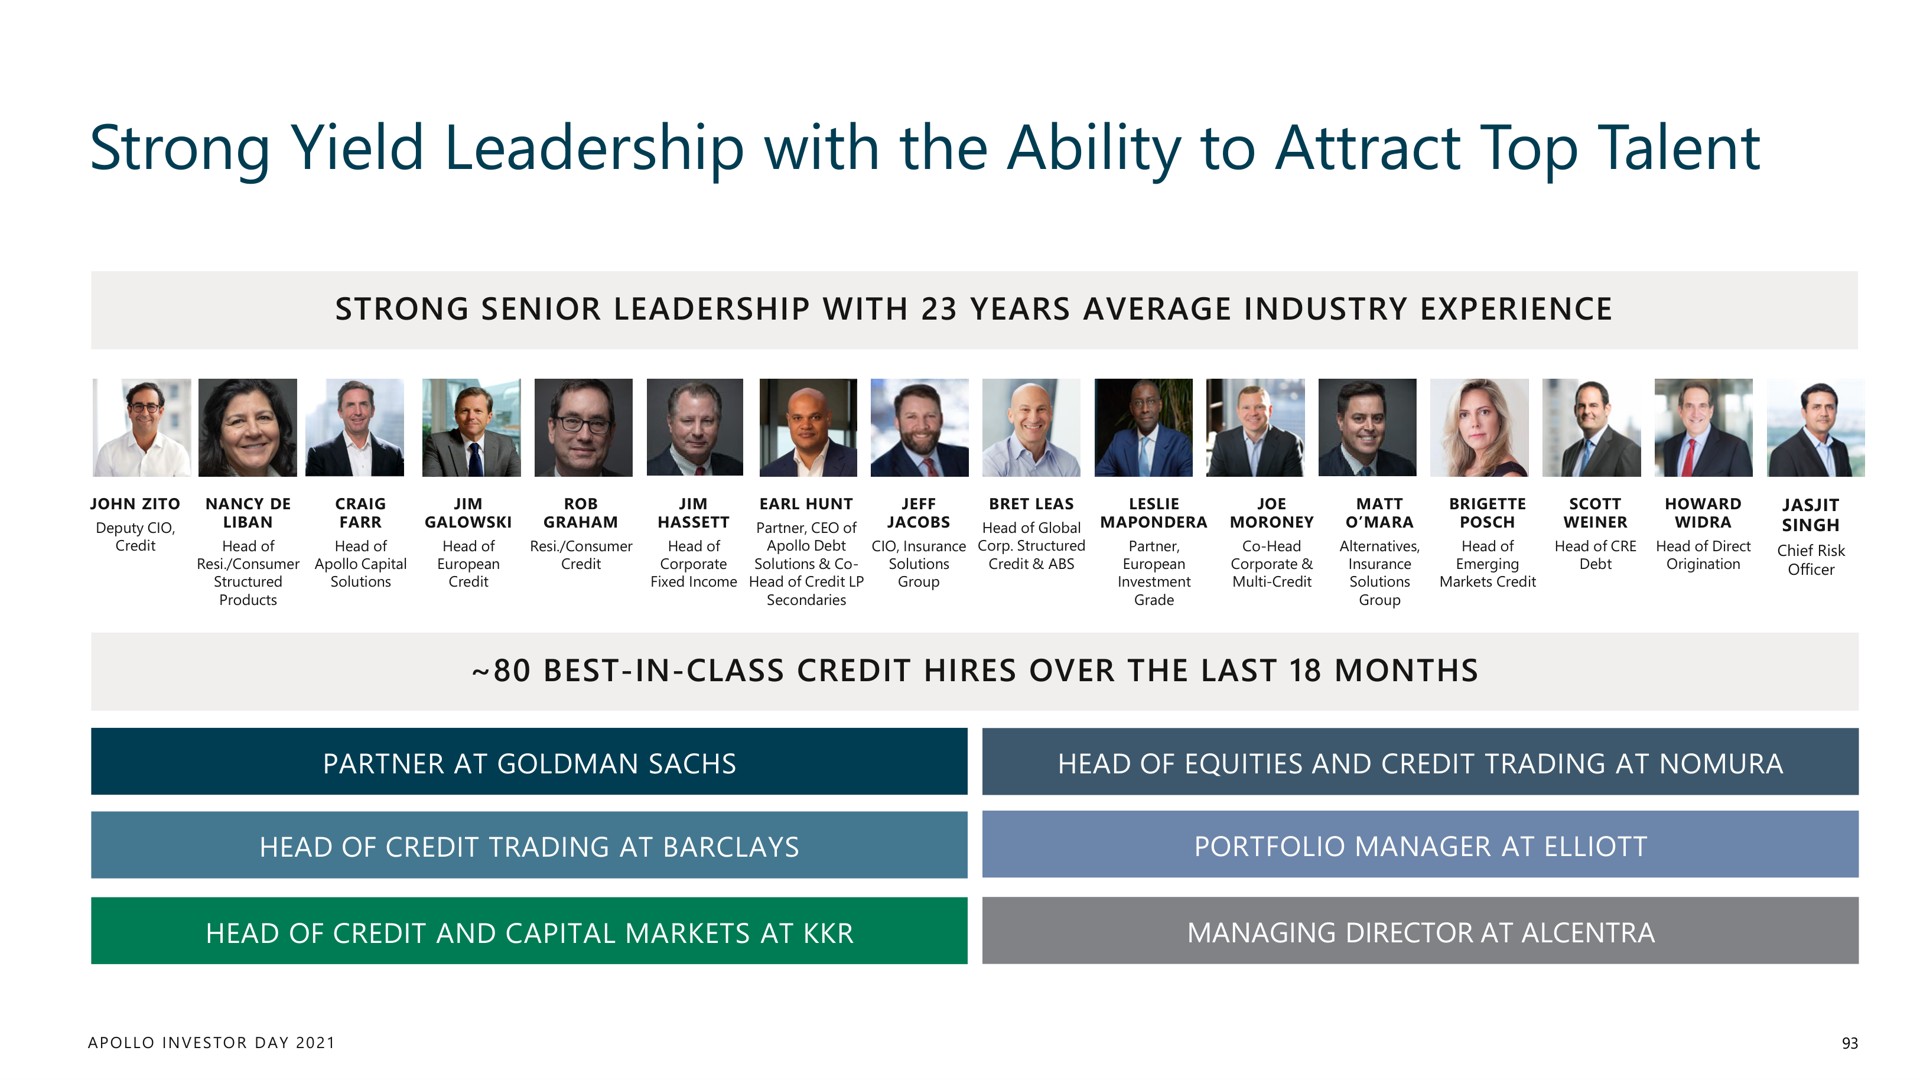 strong yield leadership with the ability to attract top talent rages | Apollo Global Management